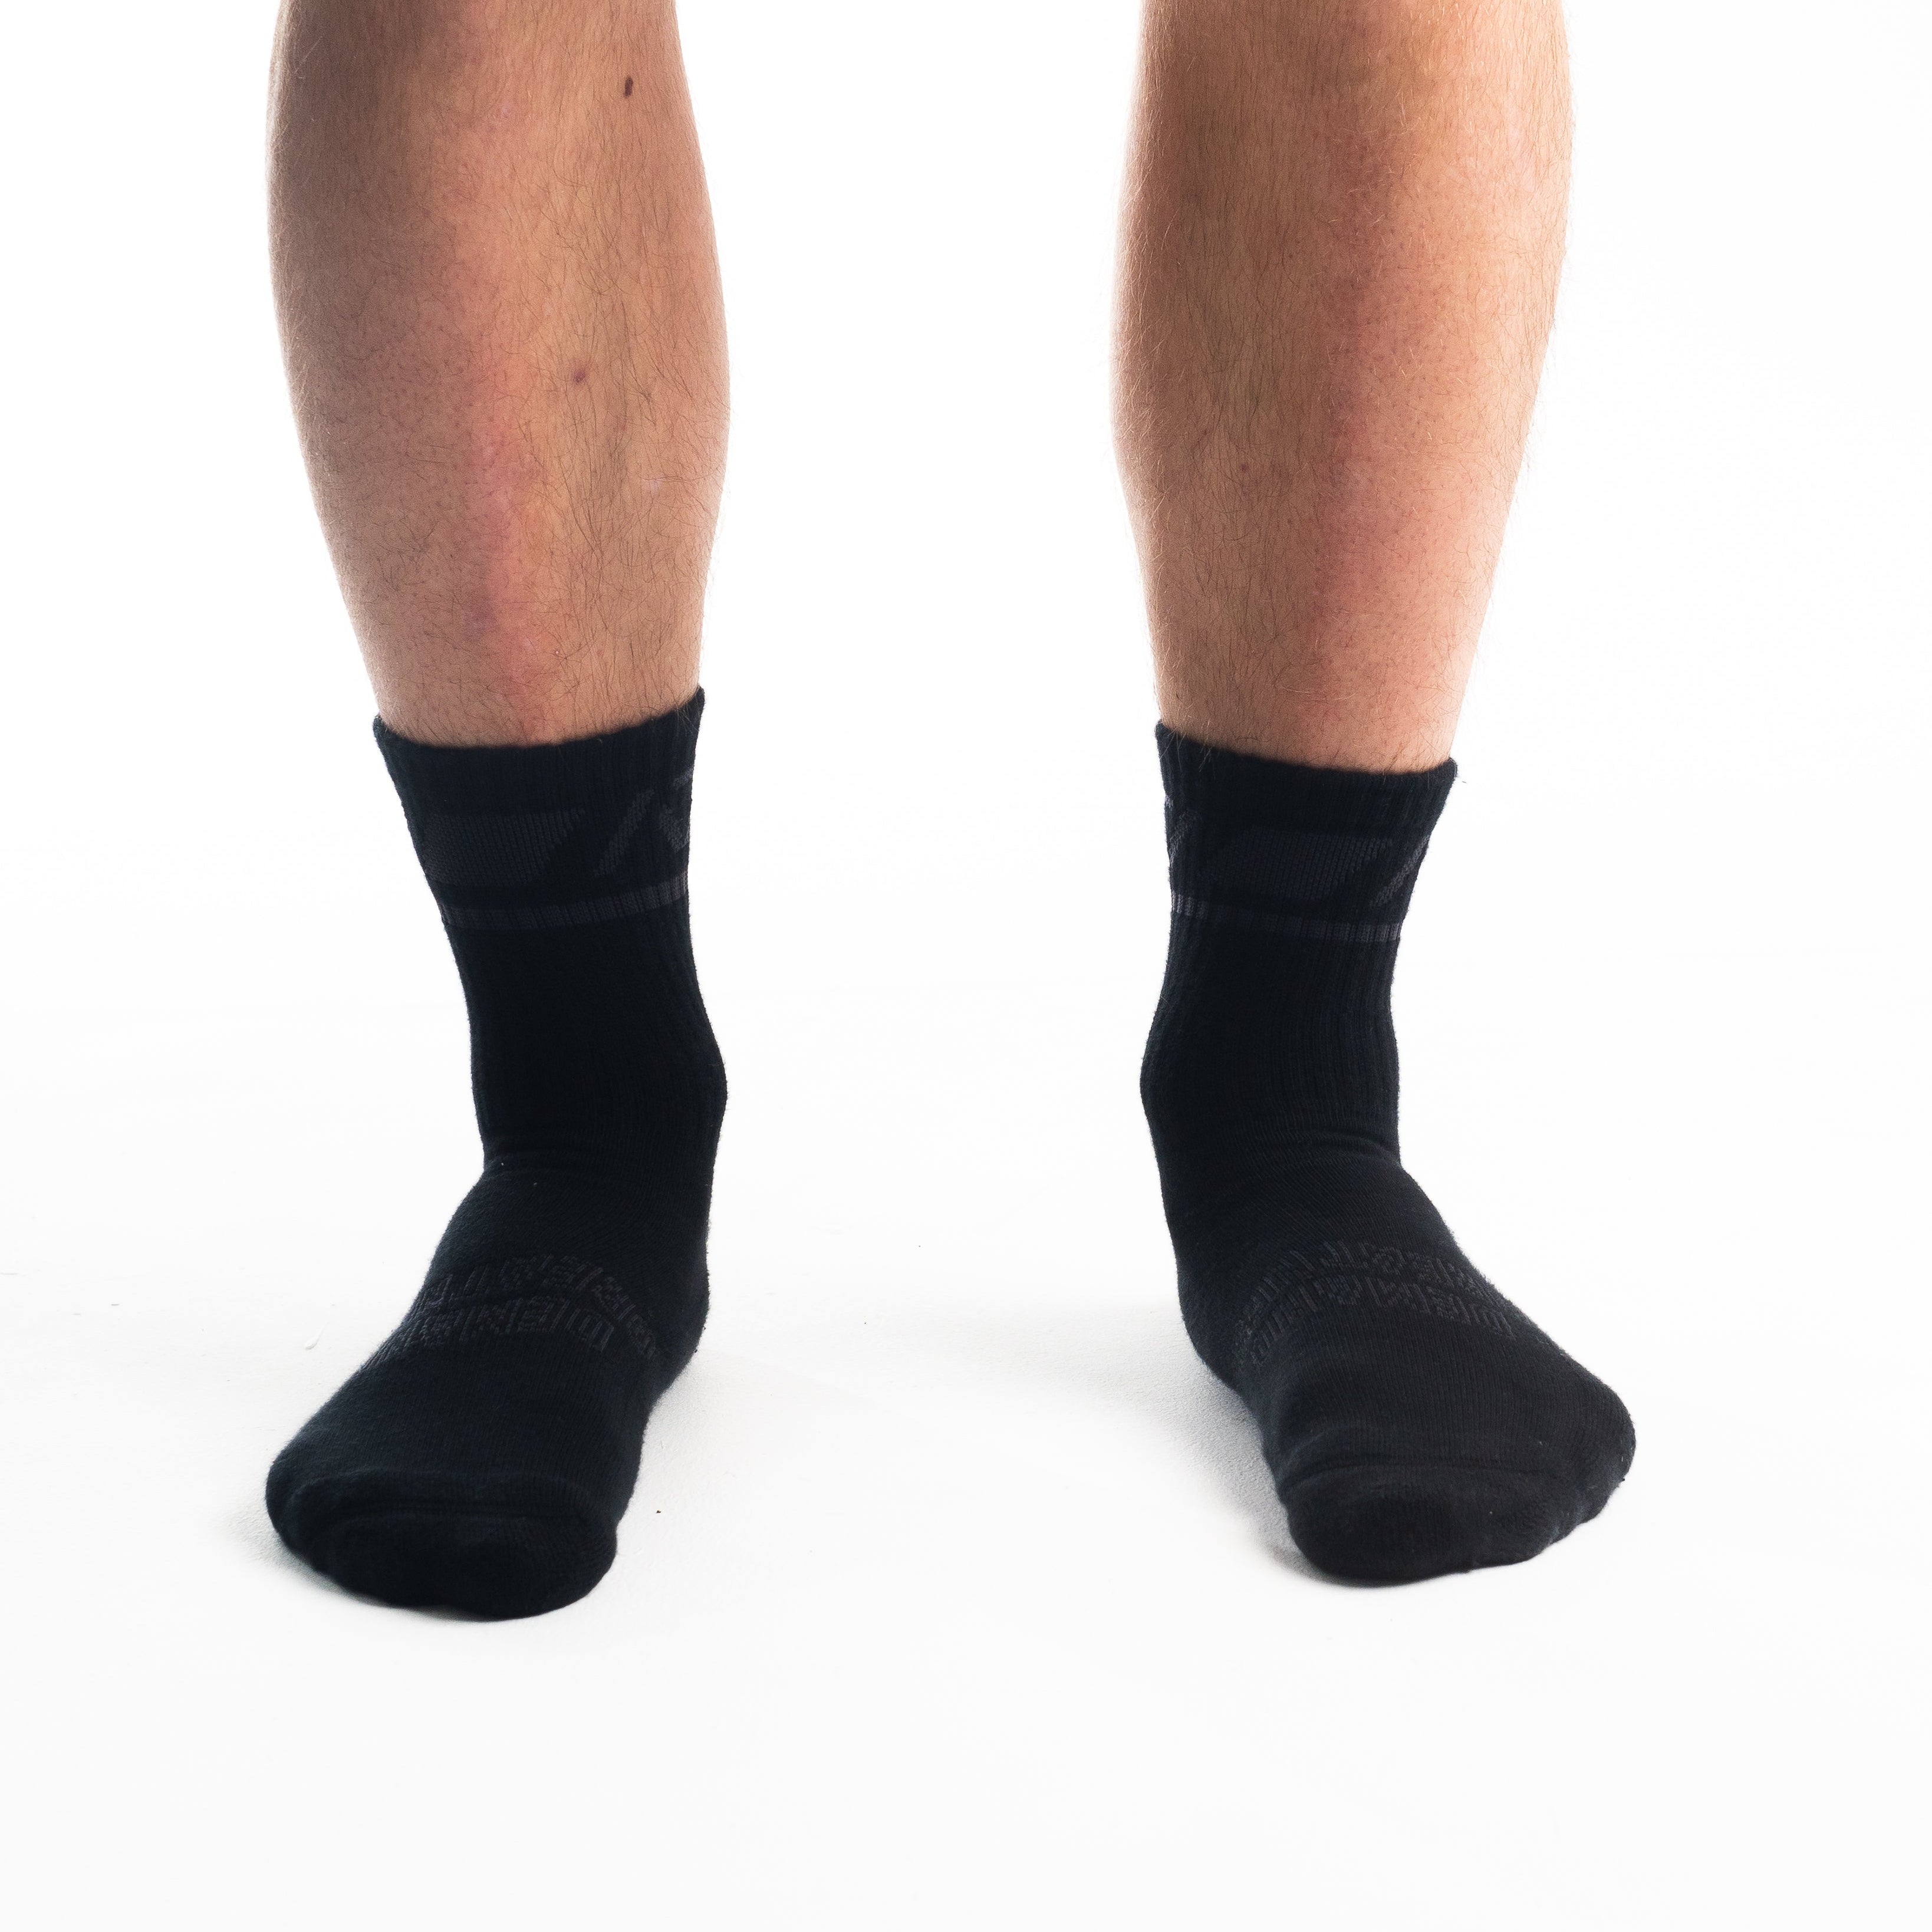 A7 Stealth Crew socks showcase gold logos and let your energy show on the platform, in your training or while out and about. The IPF Approved Stealth Meet Kit includes Powerlifting Singlet, A7 Meet Shirt, A7 Zebra Wrist Wraps, A7 Deadlift Socks, Hourglass Knee Sleeves (Stiff Knee Sleeves and Rigor Mortis Knee Sleeves). Genouillères powerlifting shipping to France, Spain, Ireland, Germany, Italy, Sweden and EU.